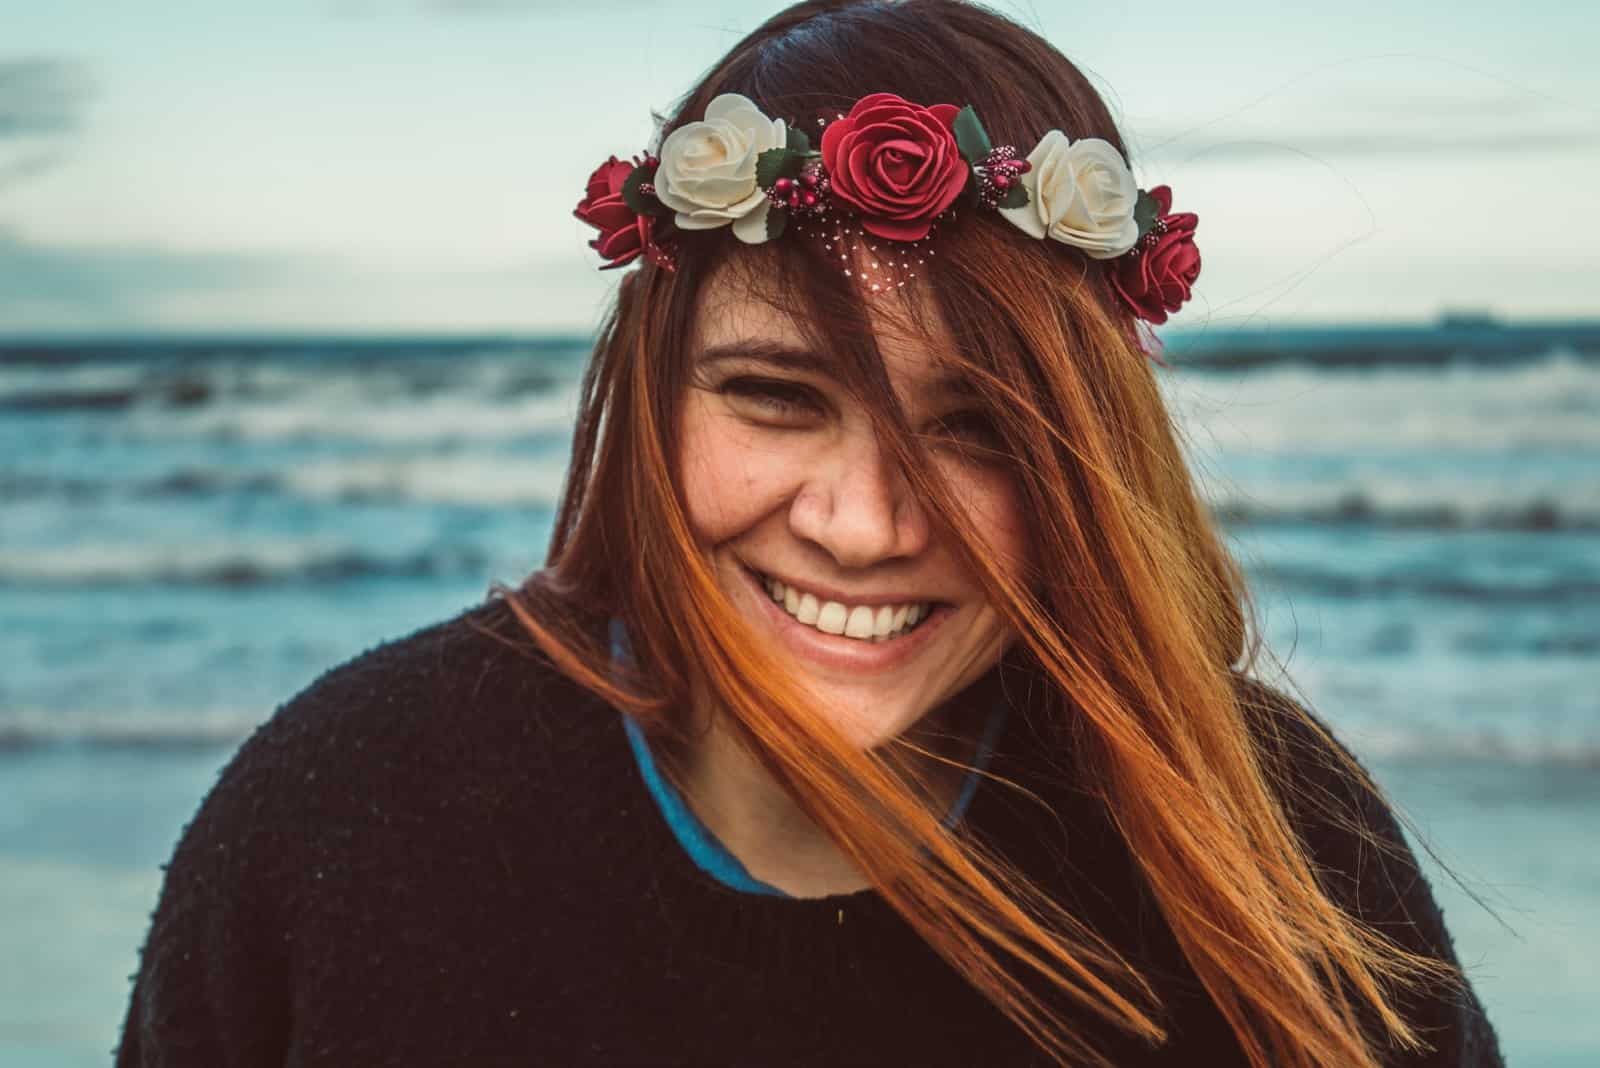 woman with flower crown smiling while standing near sea